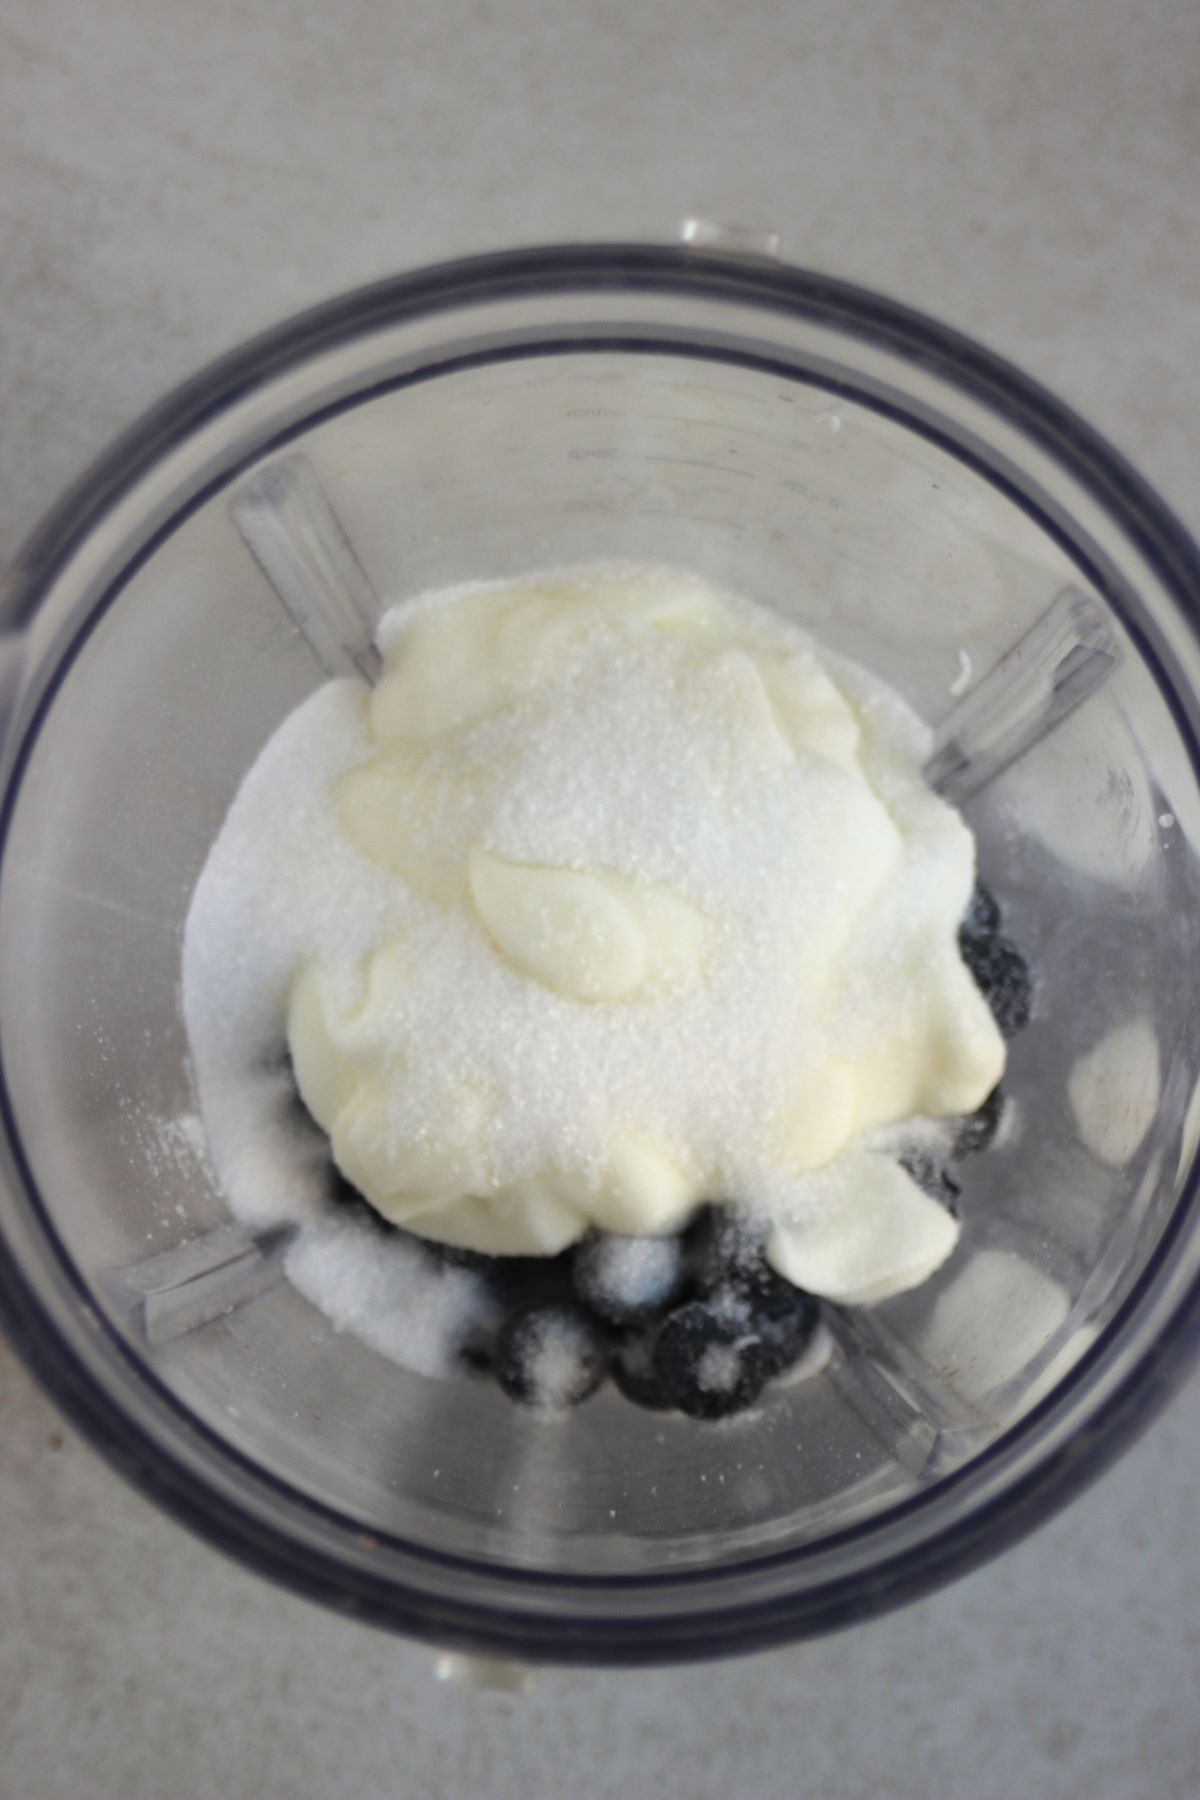 Blender with blueberries, sugar, and yogurt seen from above.